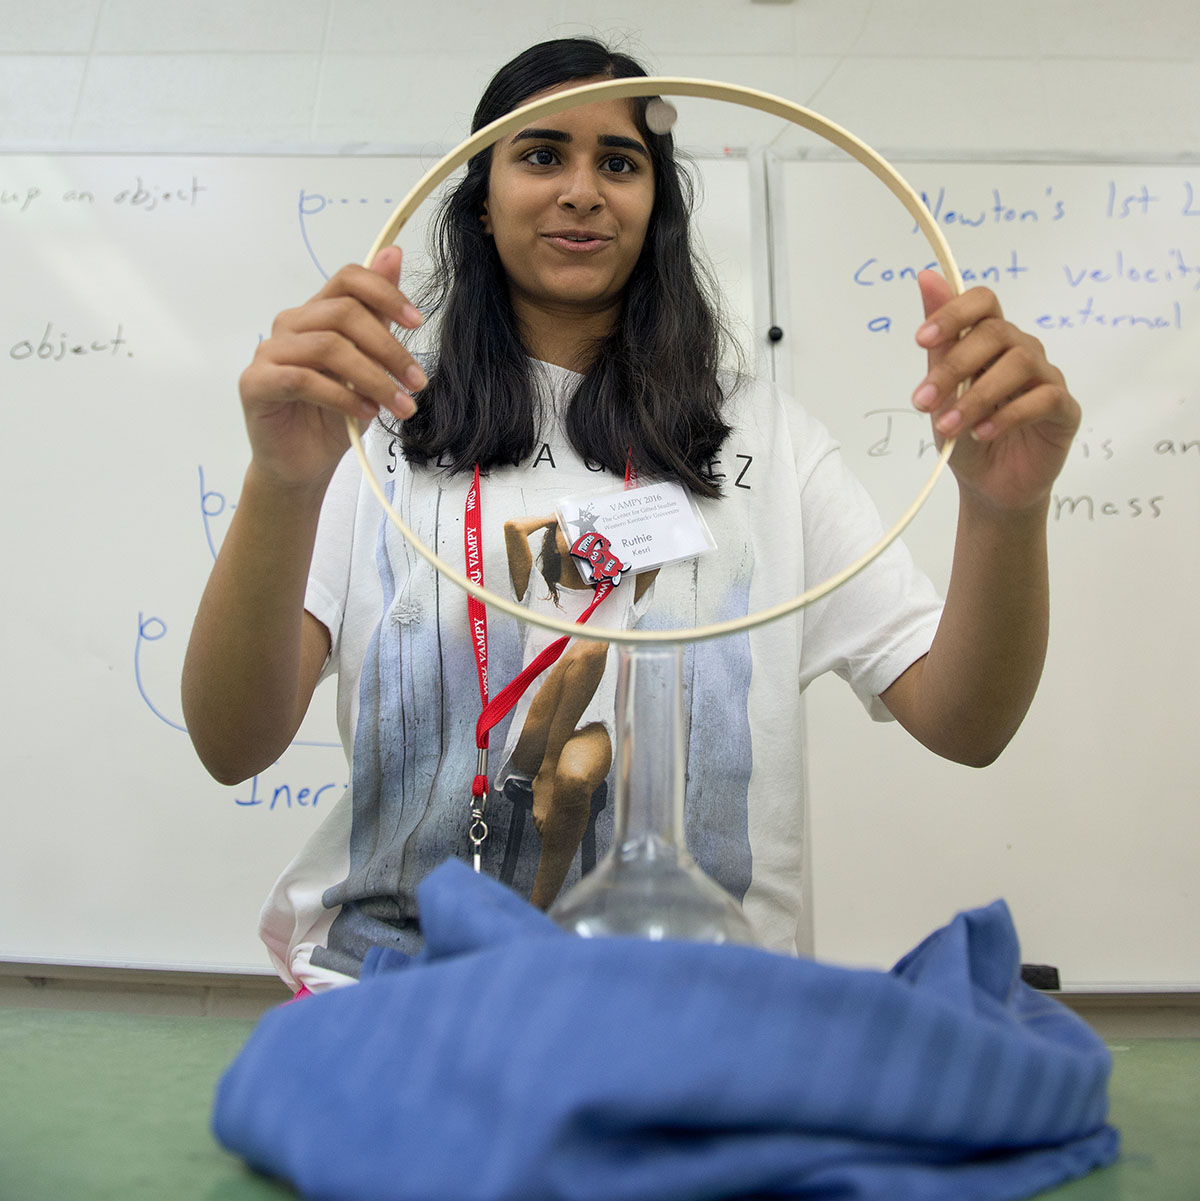 Ruthie Kesri from Bowling Green attempts to drop a coin from the ring she is holding into the flask beneath during Physics Thursday, June 30. The task demonstrated that momentum and inertia are far more difficult to overcome than the students originally thought. (Photo by Tucker Allen Covey)